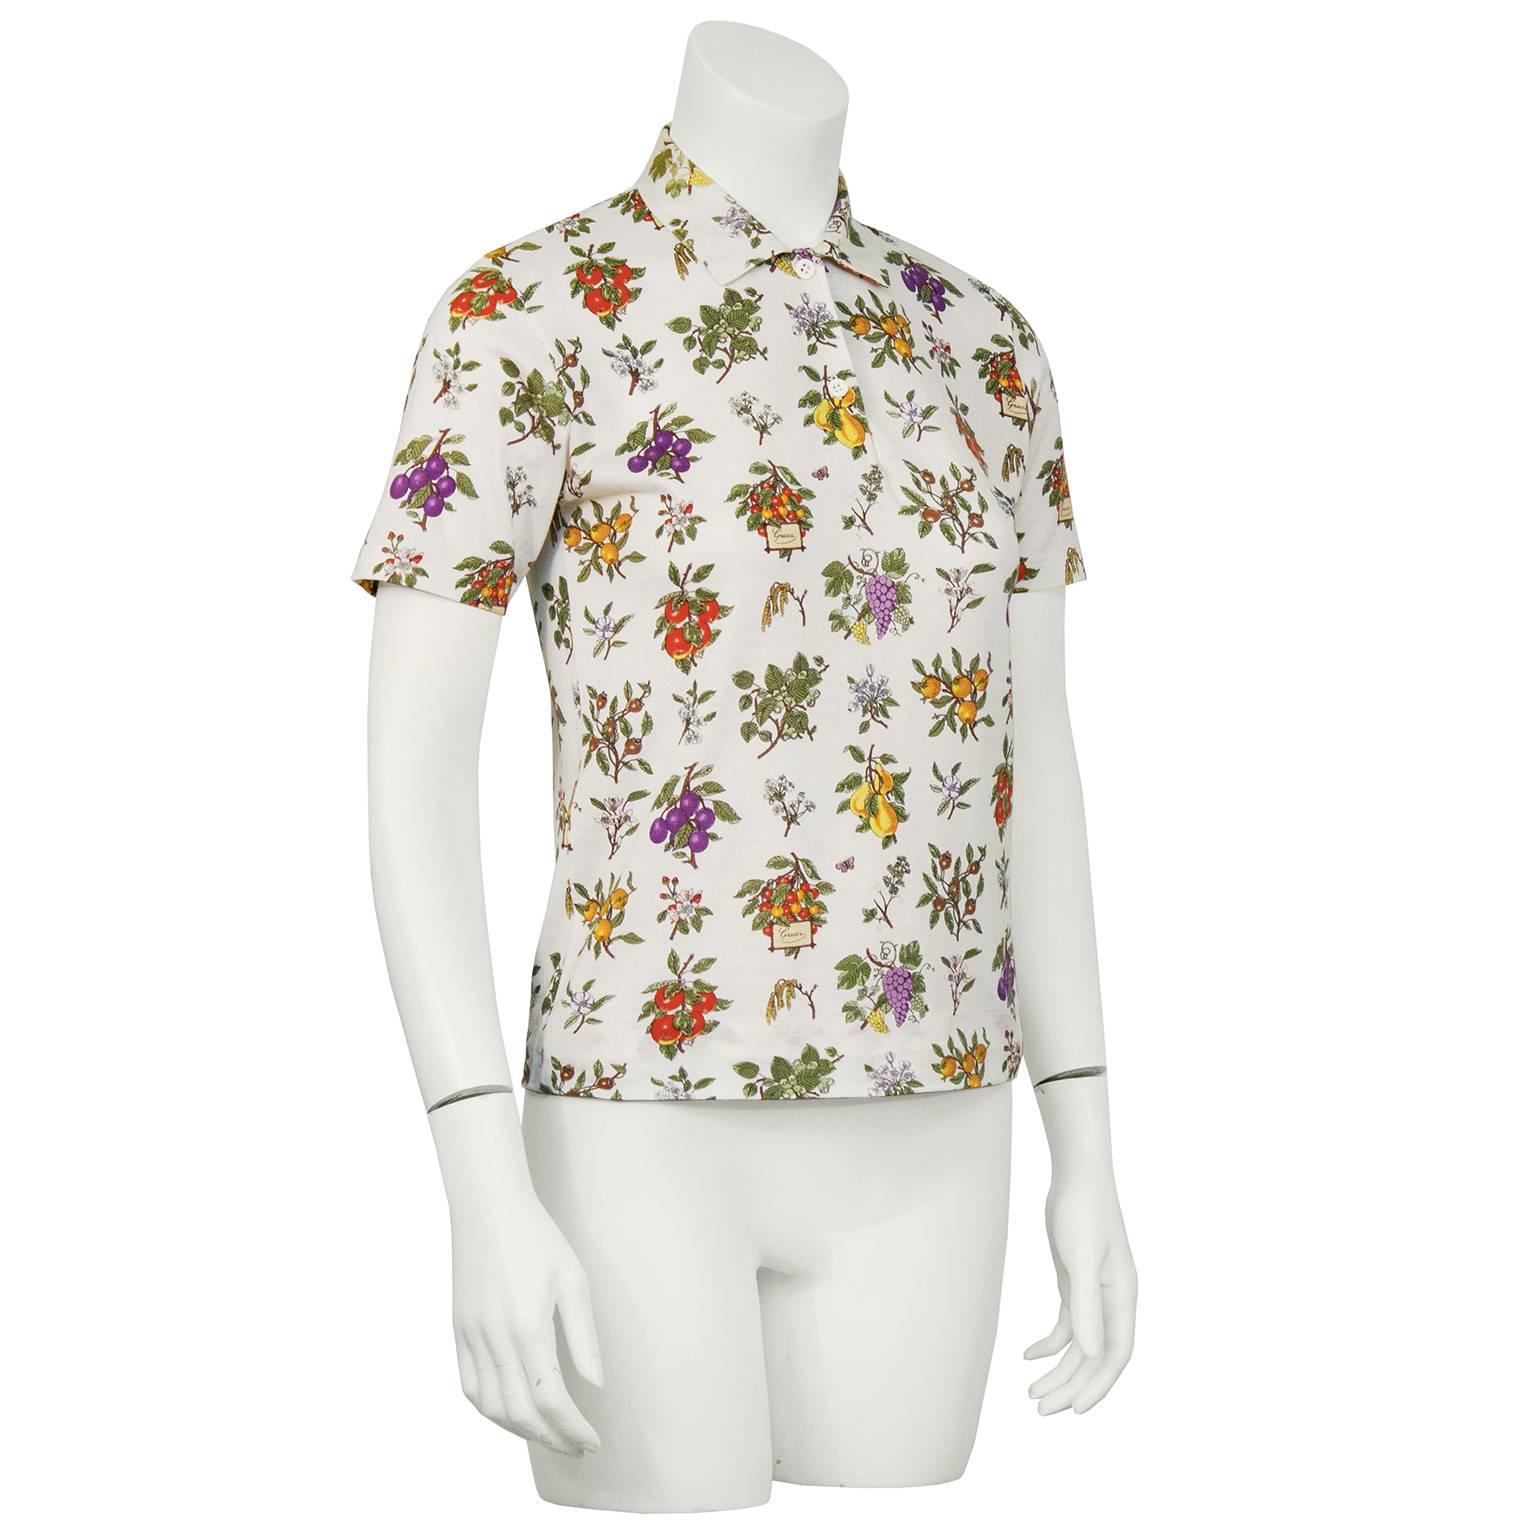 Early 1970's Gucci floral polo top in 100% fine cotton jersey. The look is classic, the fit is petite and the condition is very good vintage. There are some tiny areas of fading but hard to make out. Overall condition very good. Fits like a US size